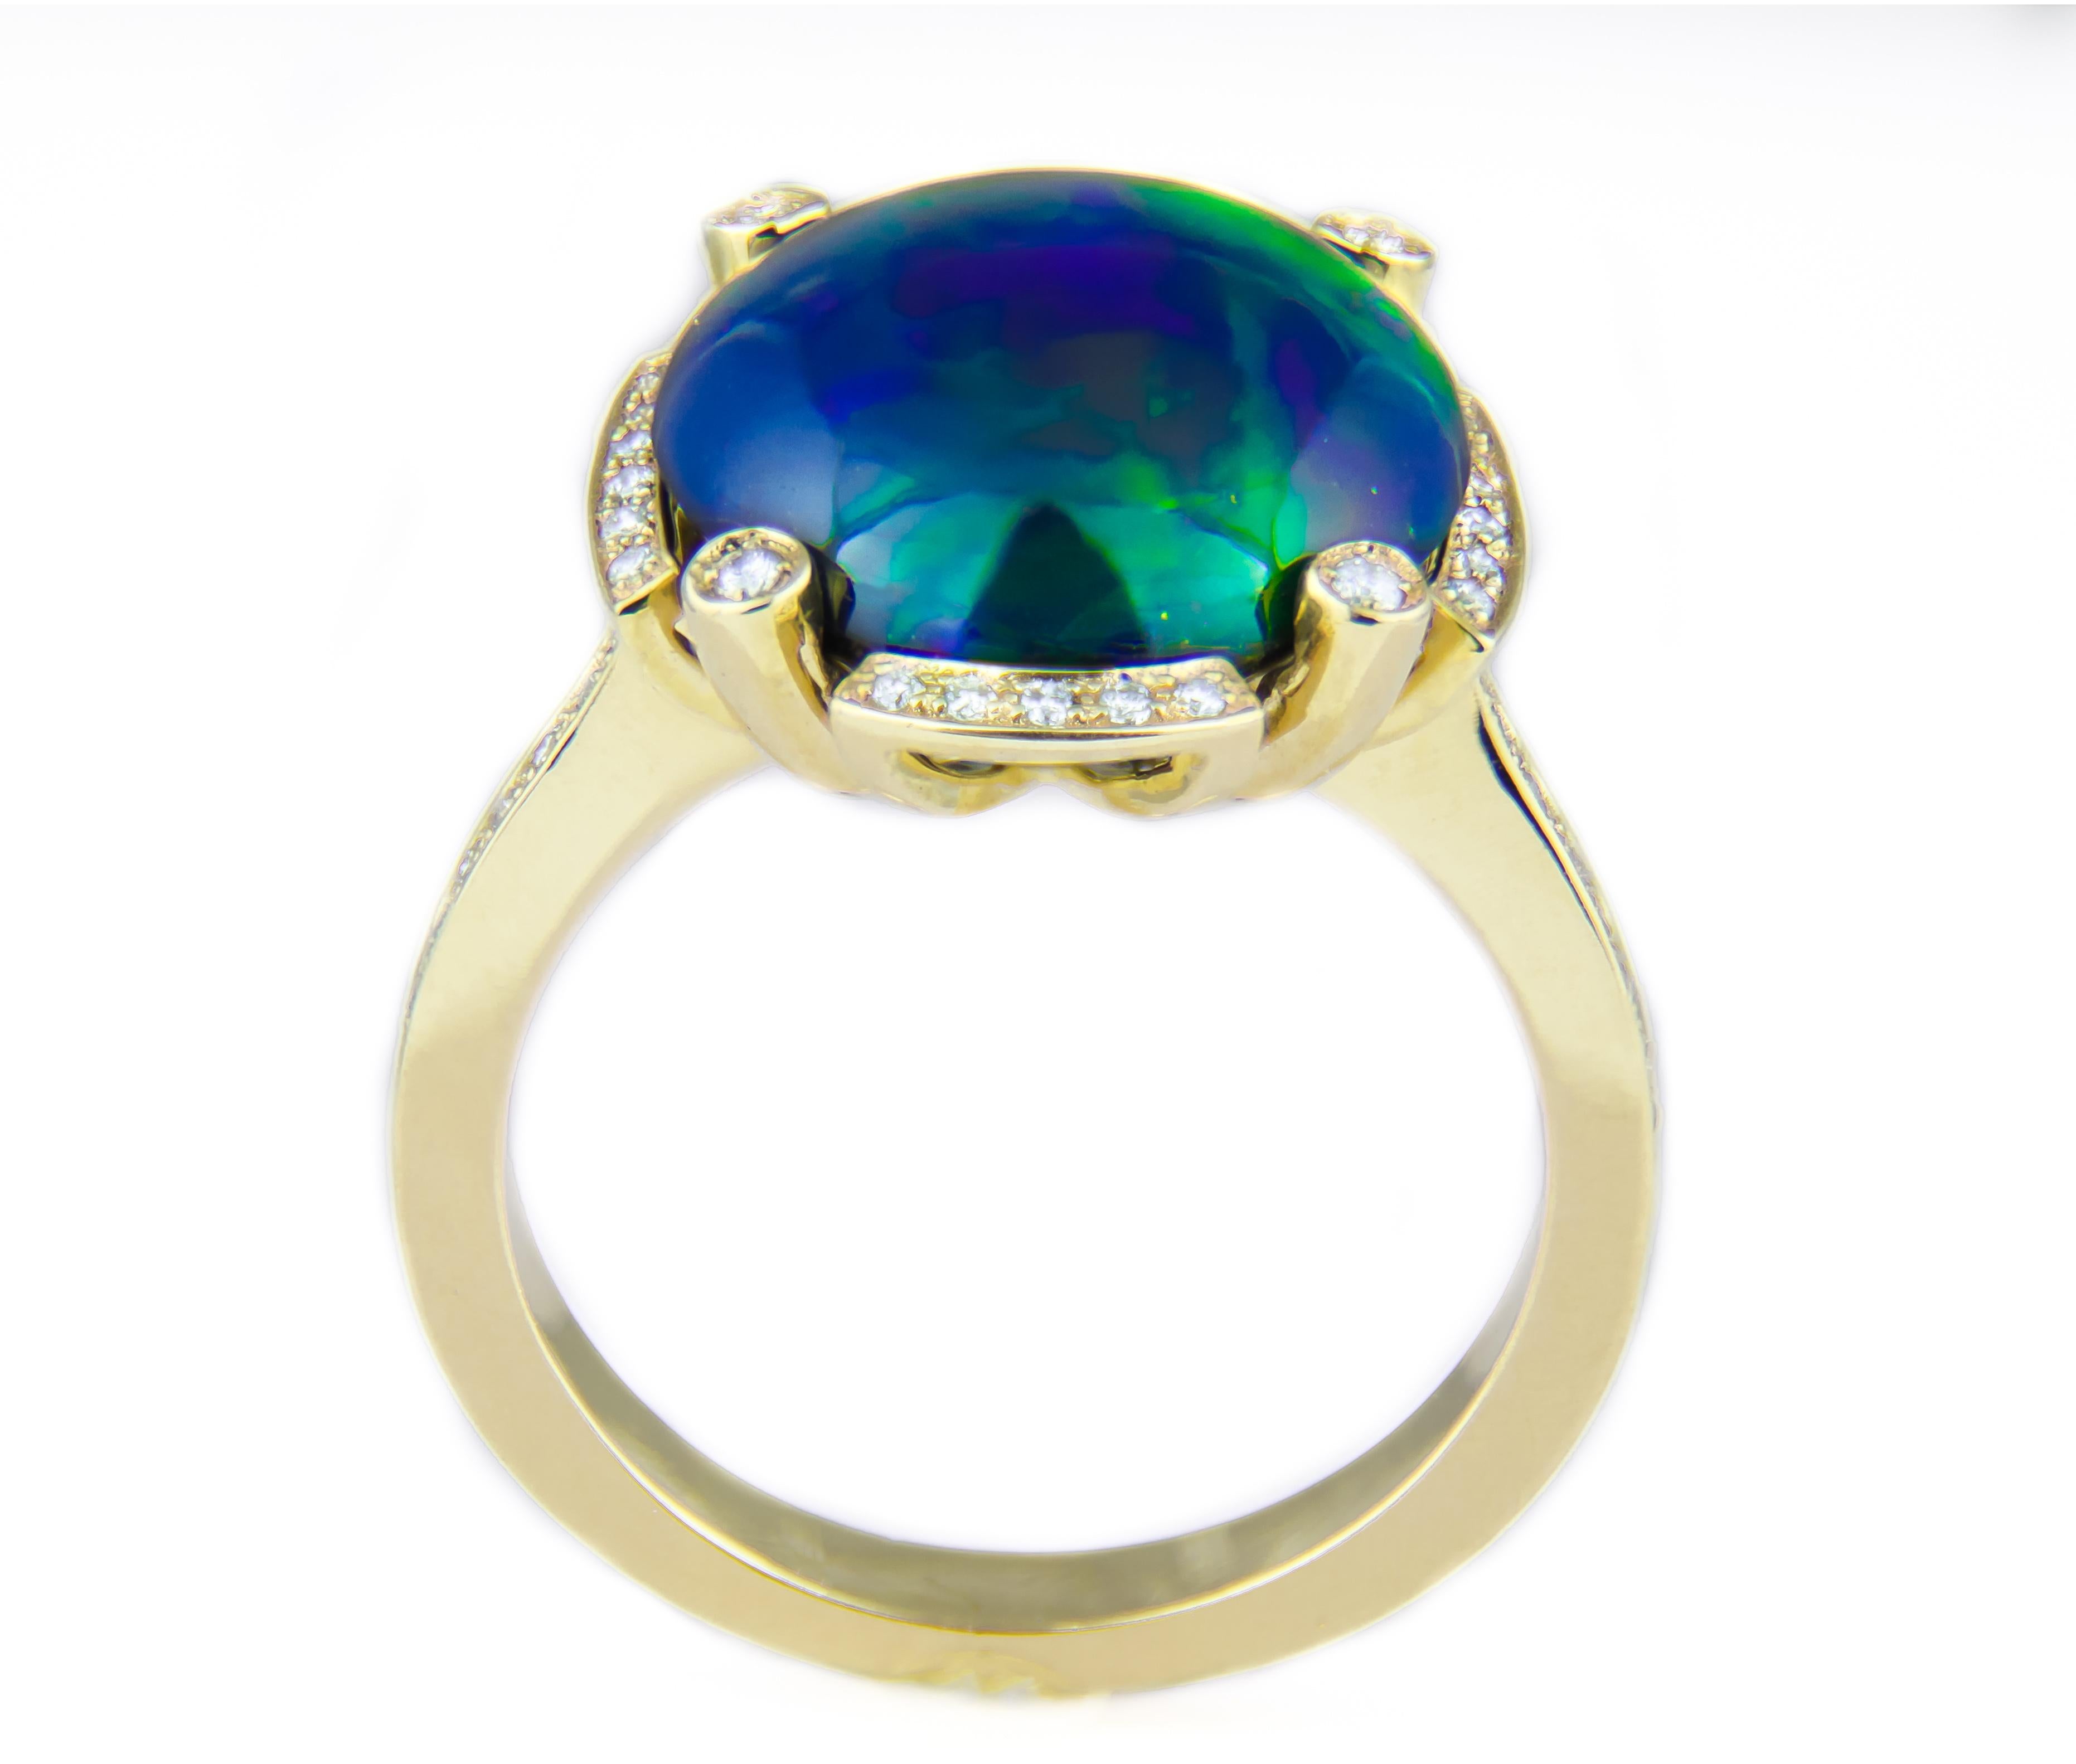 For Sale:  Black Opal and Diamonds Ring in 14k Gold. Gold Ring with Opal ! 8